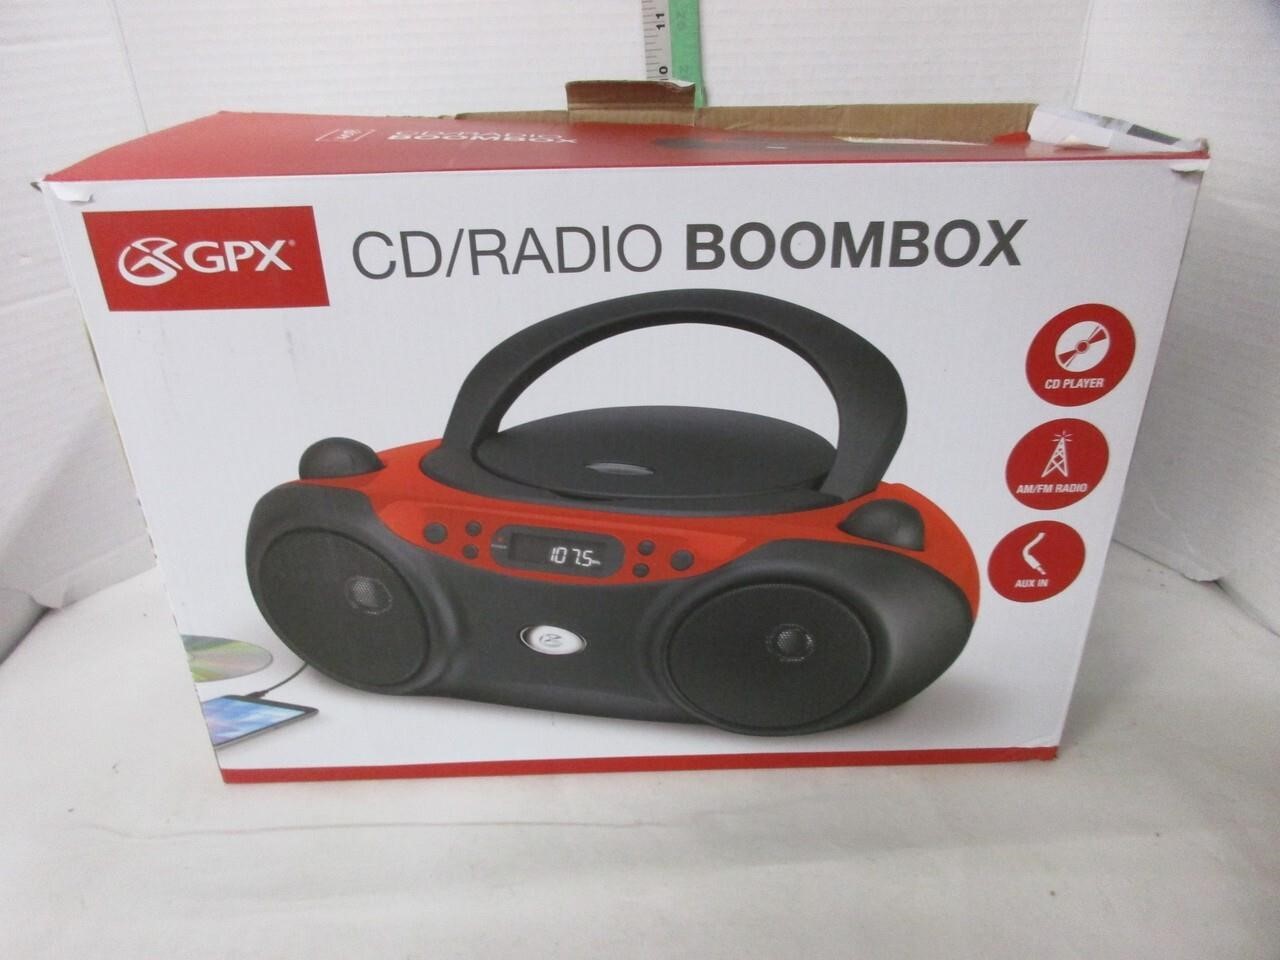 GPX Boombox - Works